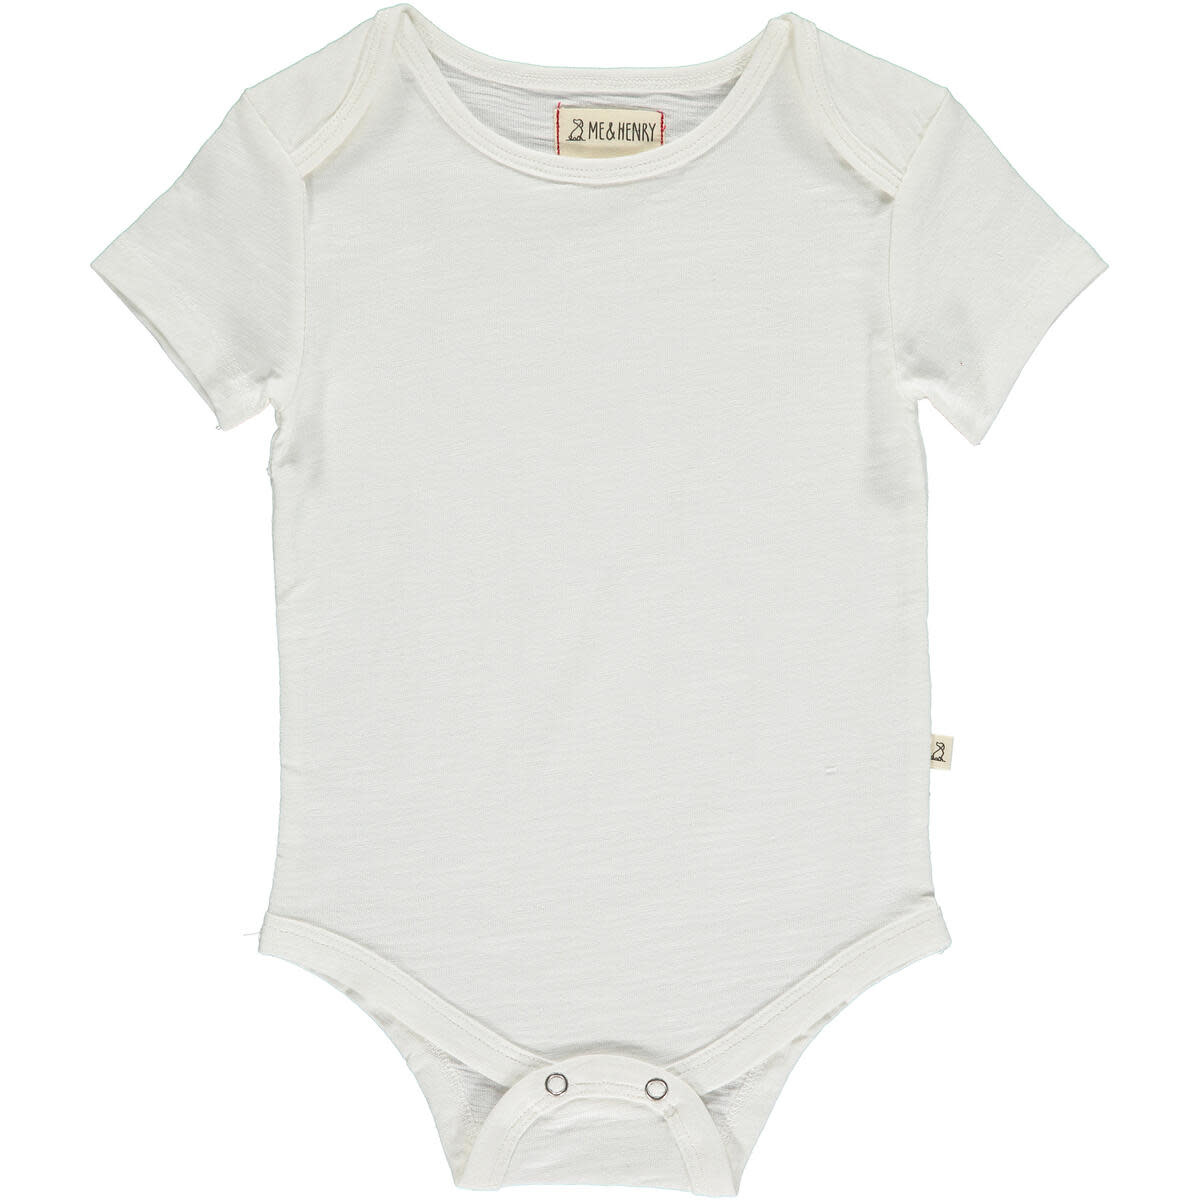 Me & Henry Baby/Toddler Solid Onesie/T-Shirt